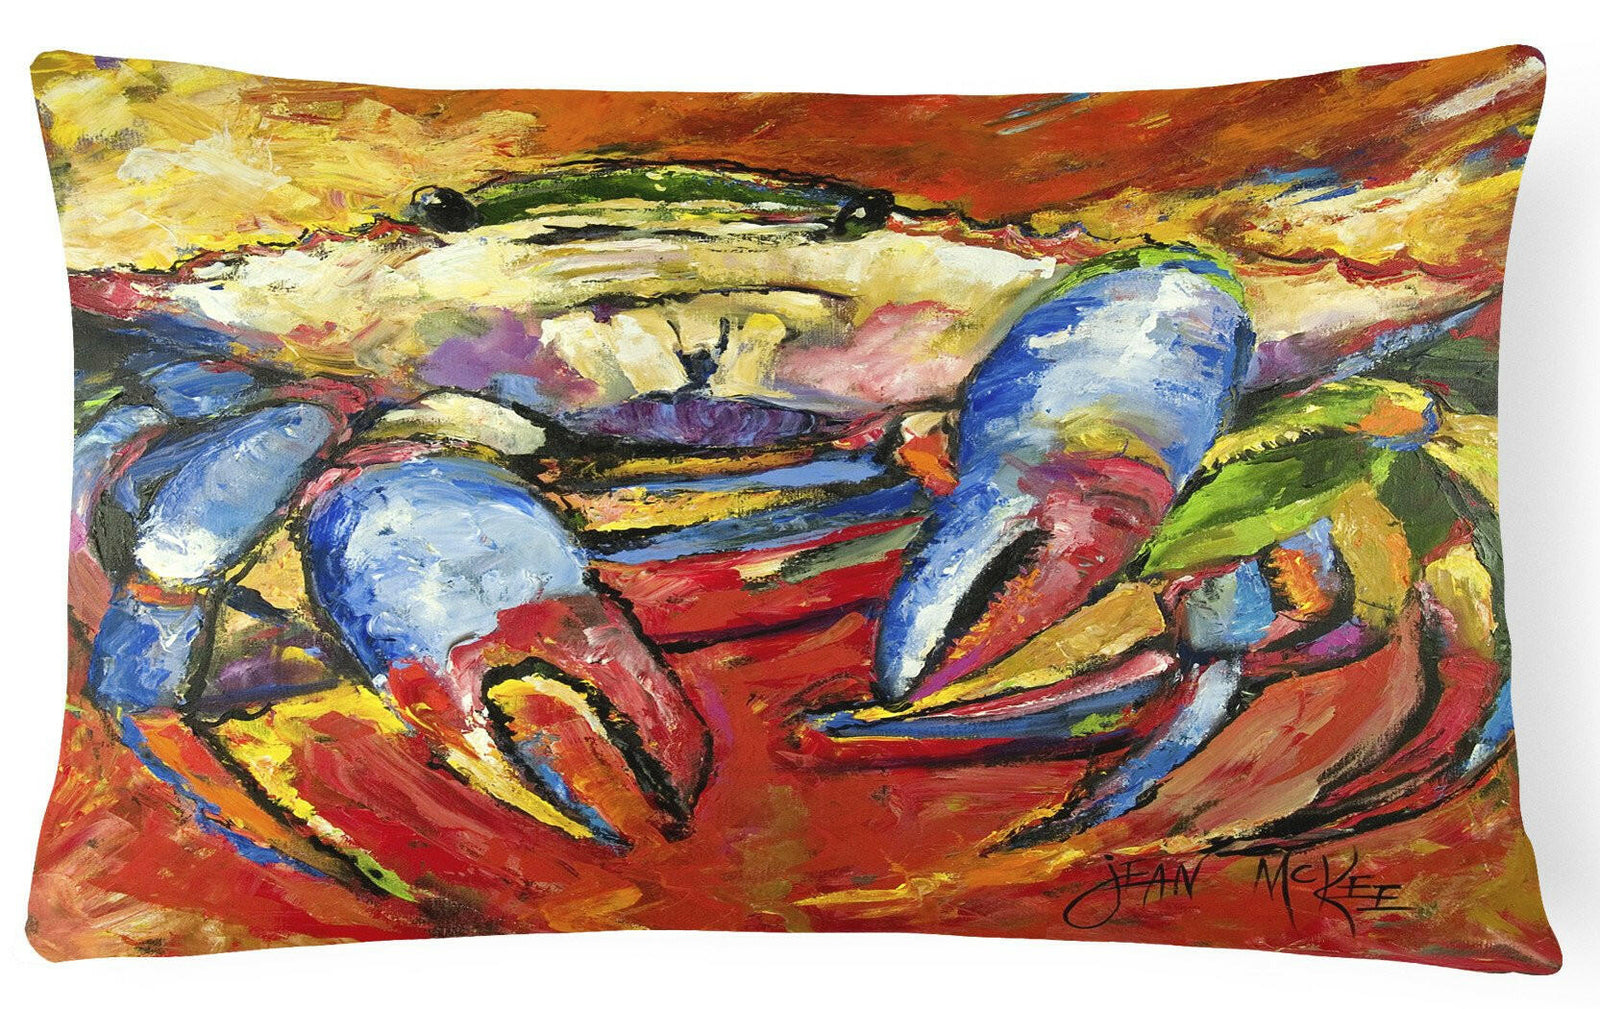 Blue Crab Red Canvas Fabric Decorative Pillow JMK1107PW1216 by Caroline's Treasures